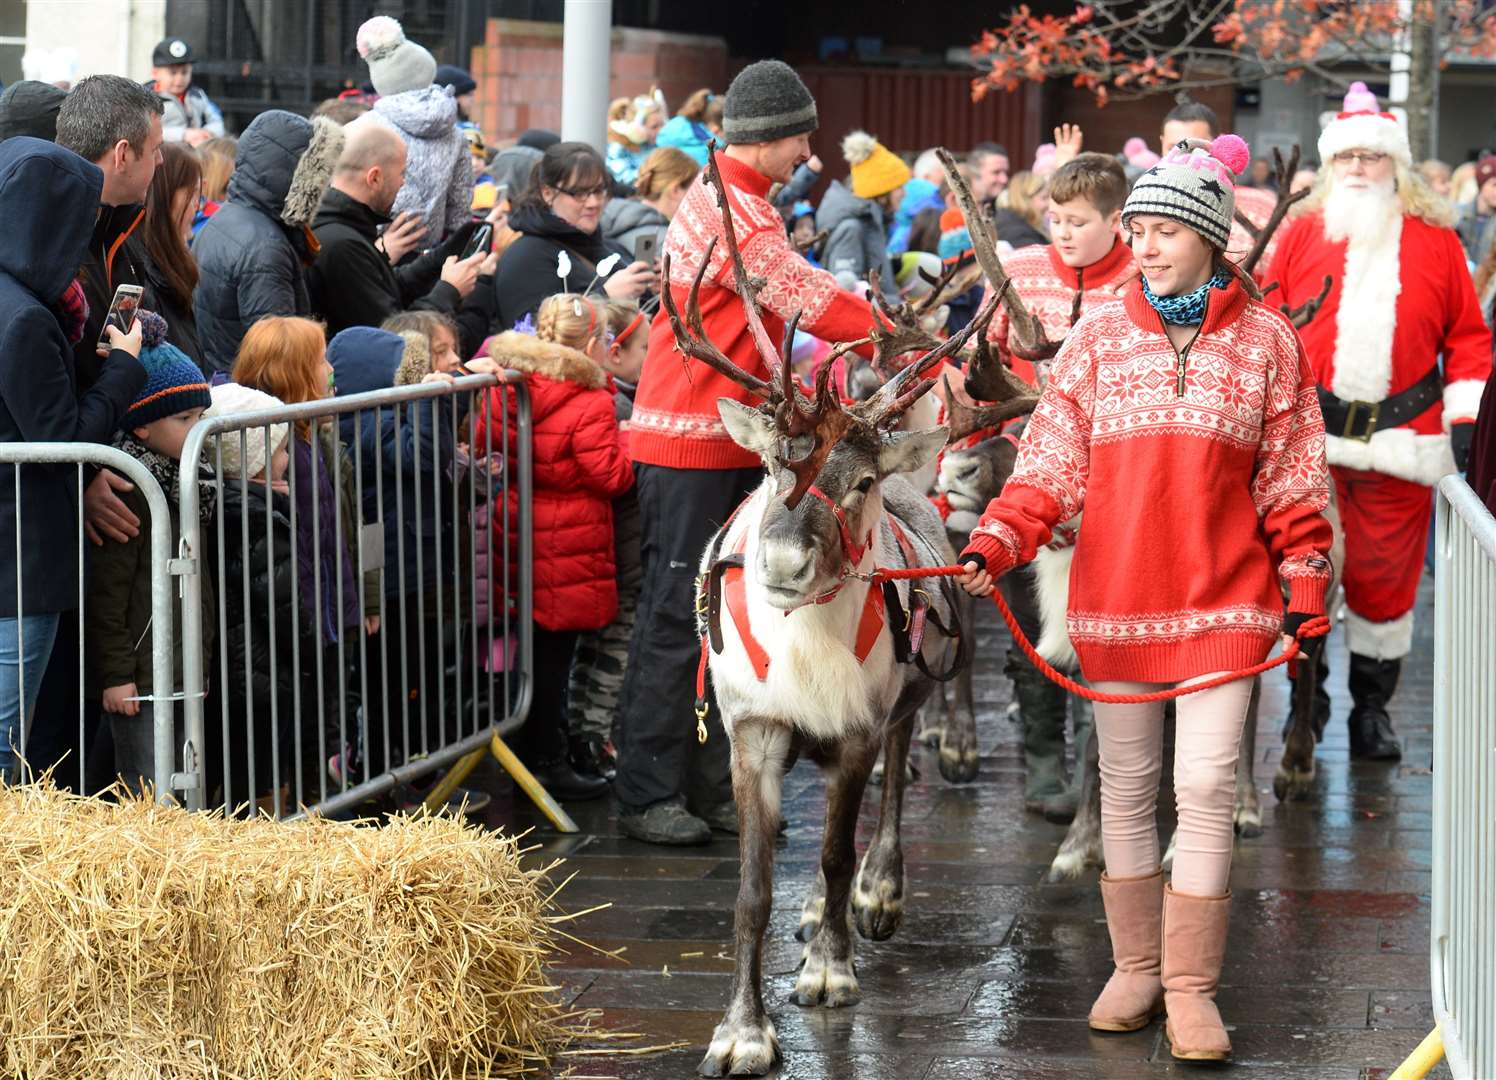 The reindeer arrive followed by Santa. Picture: Gary Anthony.